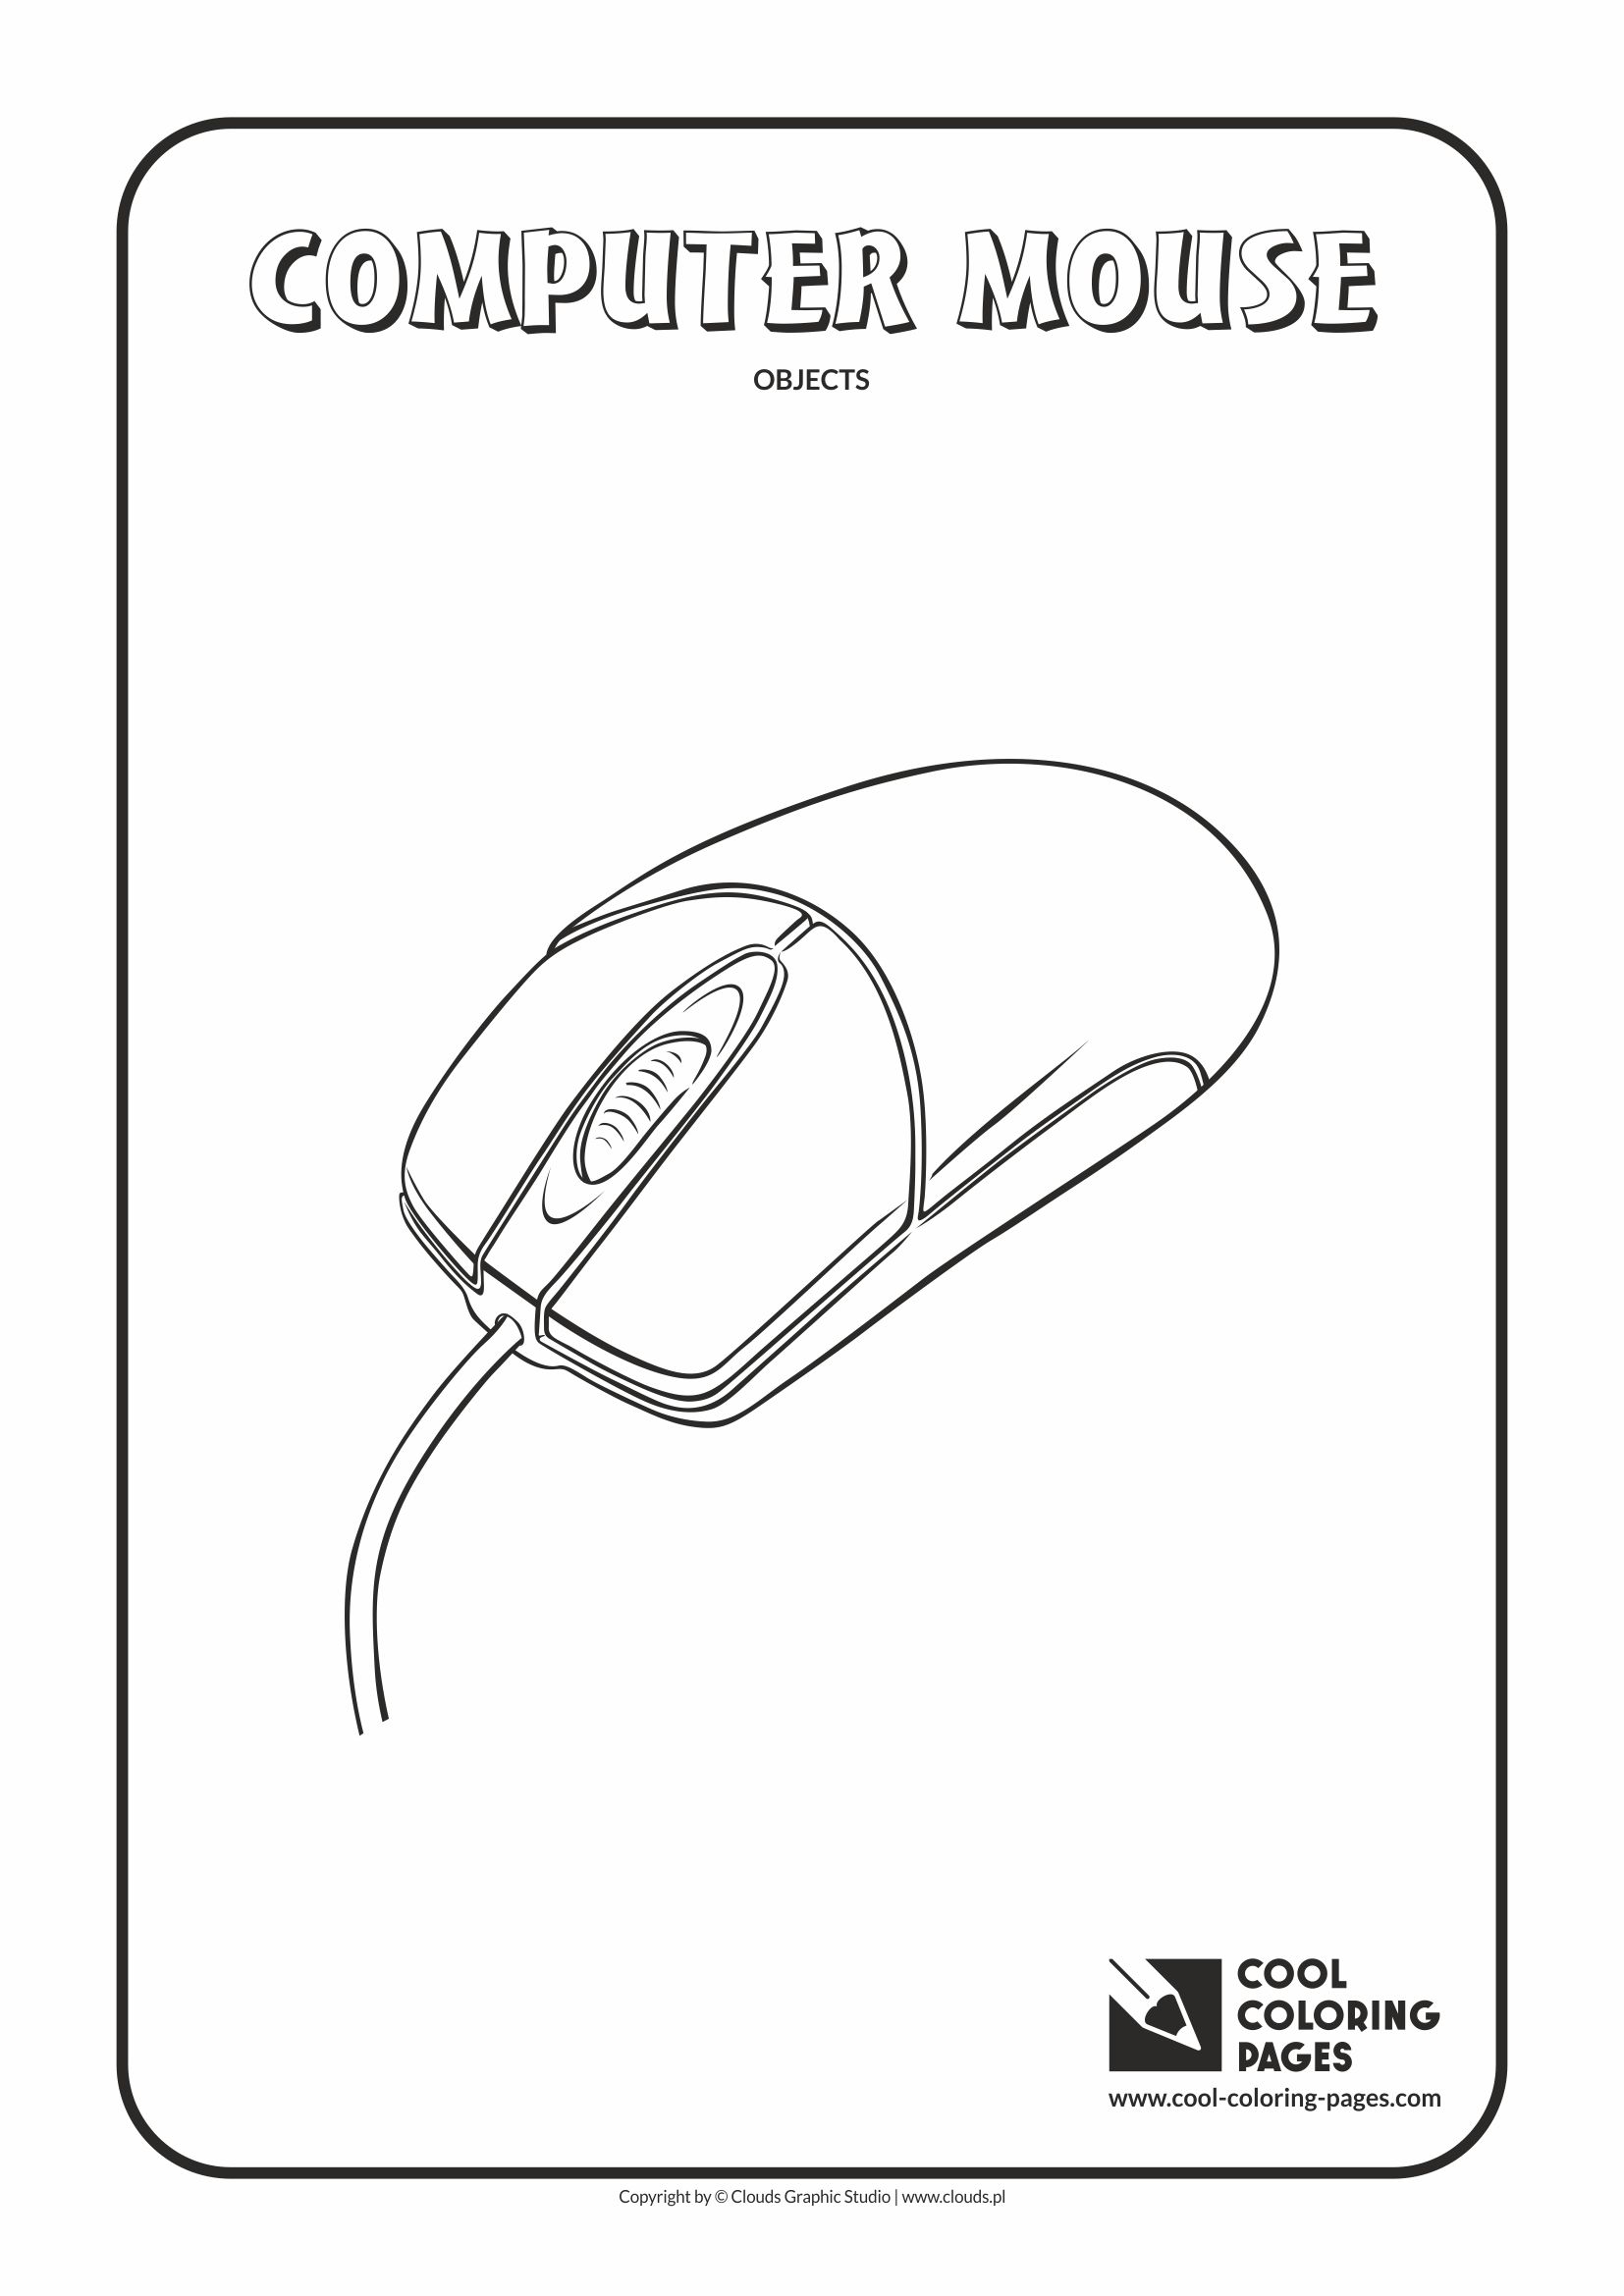 Cool Coloring Pages - Coloring objects / Computer mouse